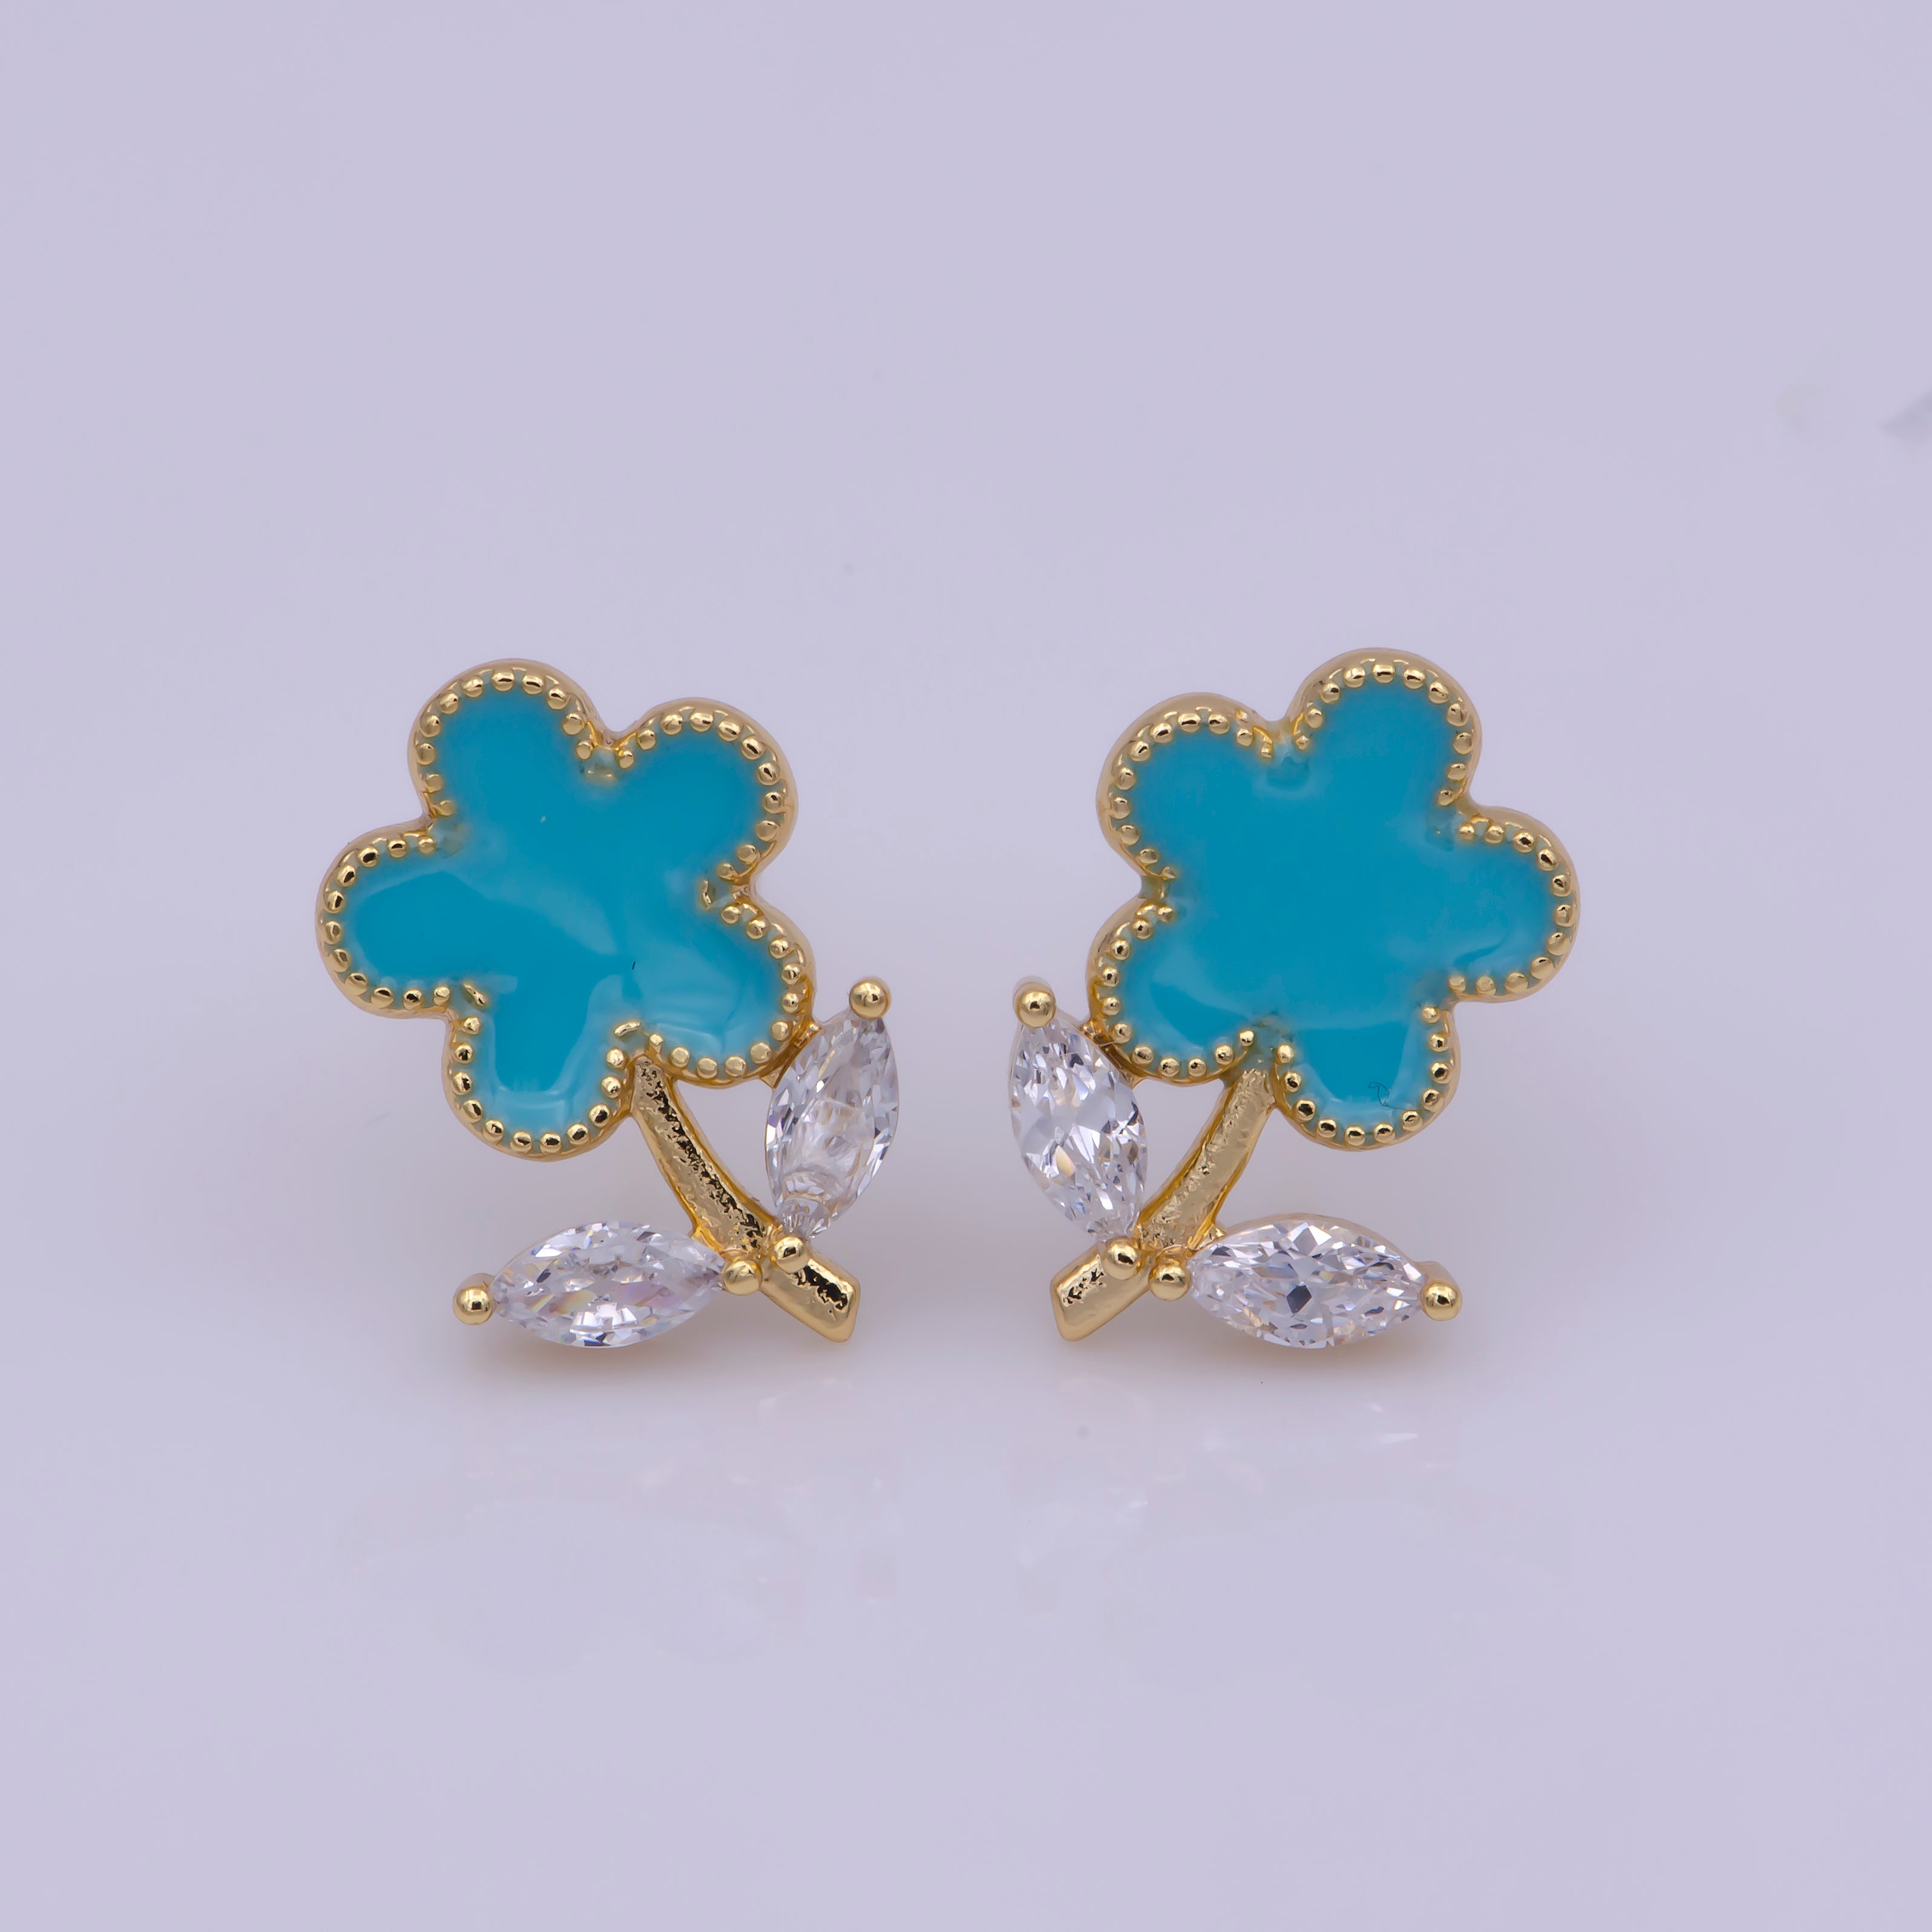 Dainty Pink, Teal, White Enamel Daisy Flower with Crystal Zirconia CZ Gold Stud Earring | T222-T234 - DLUXCA